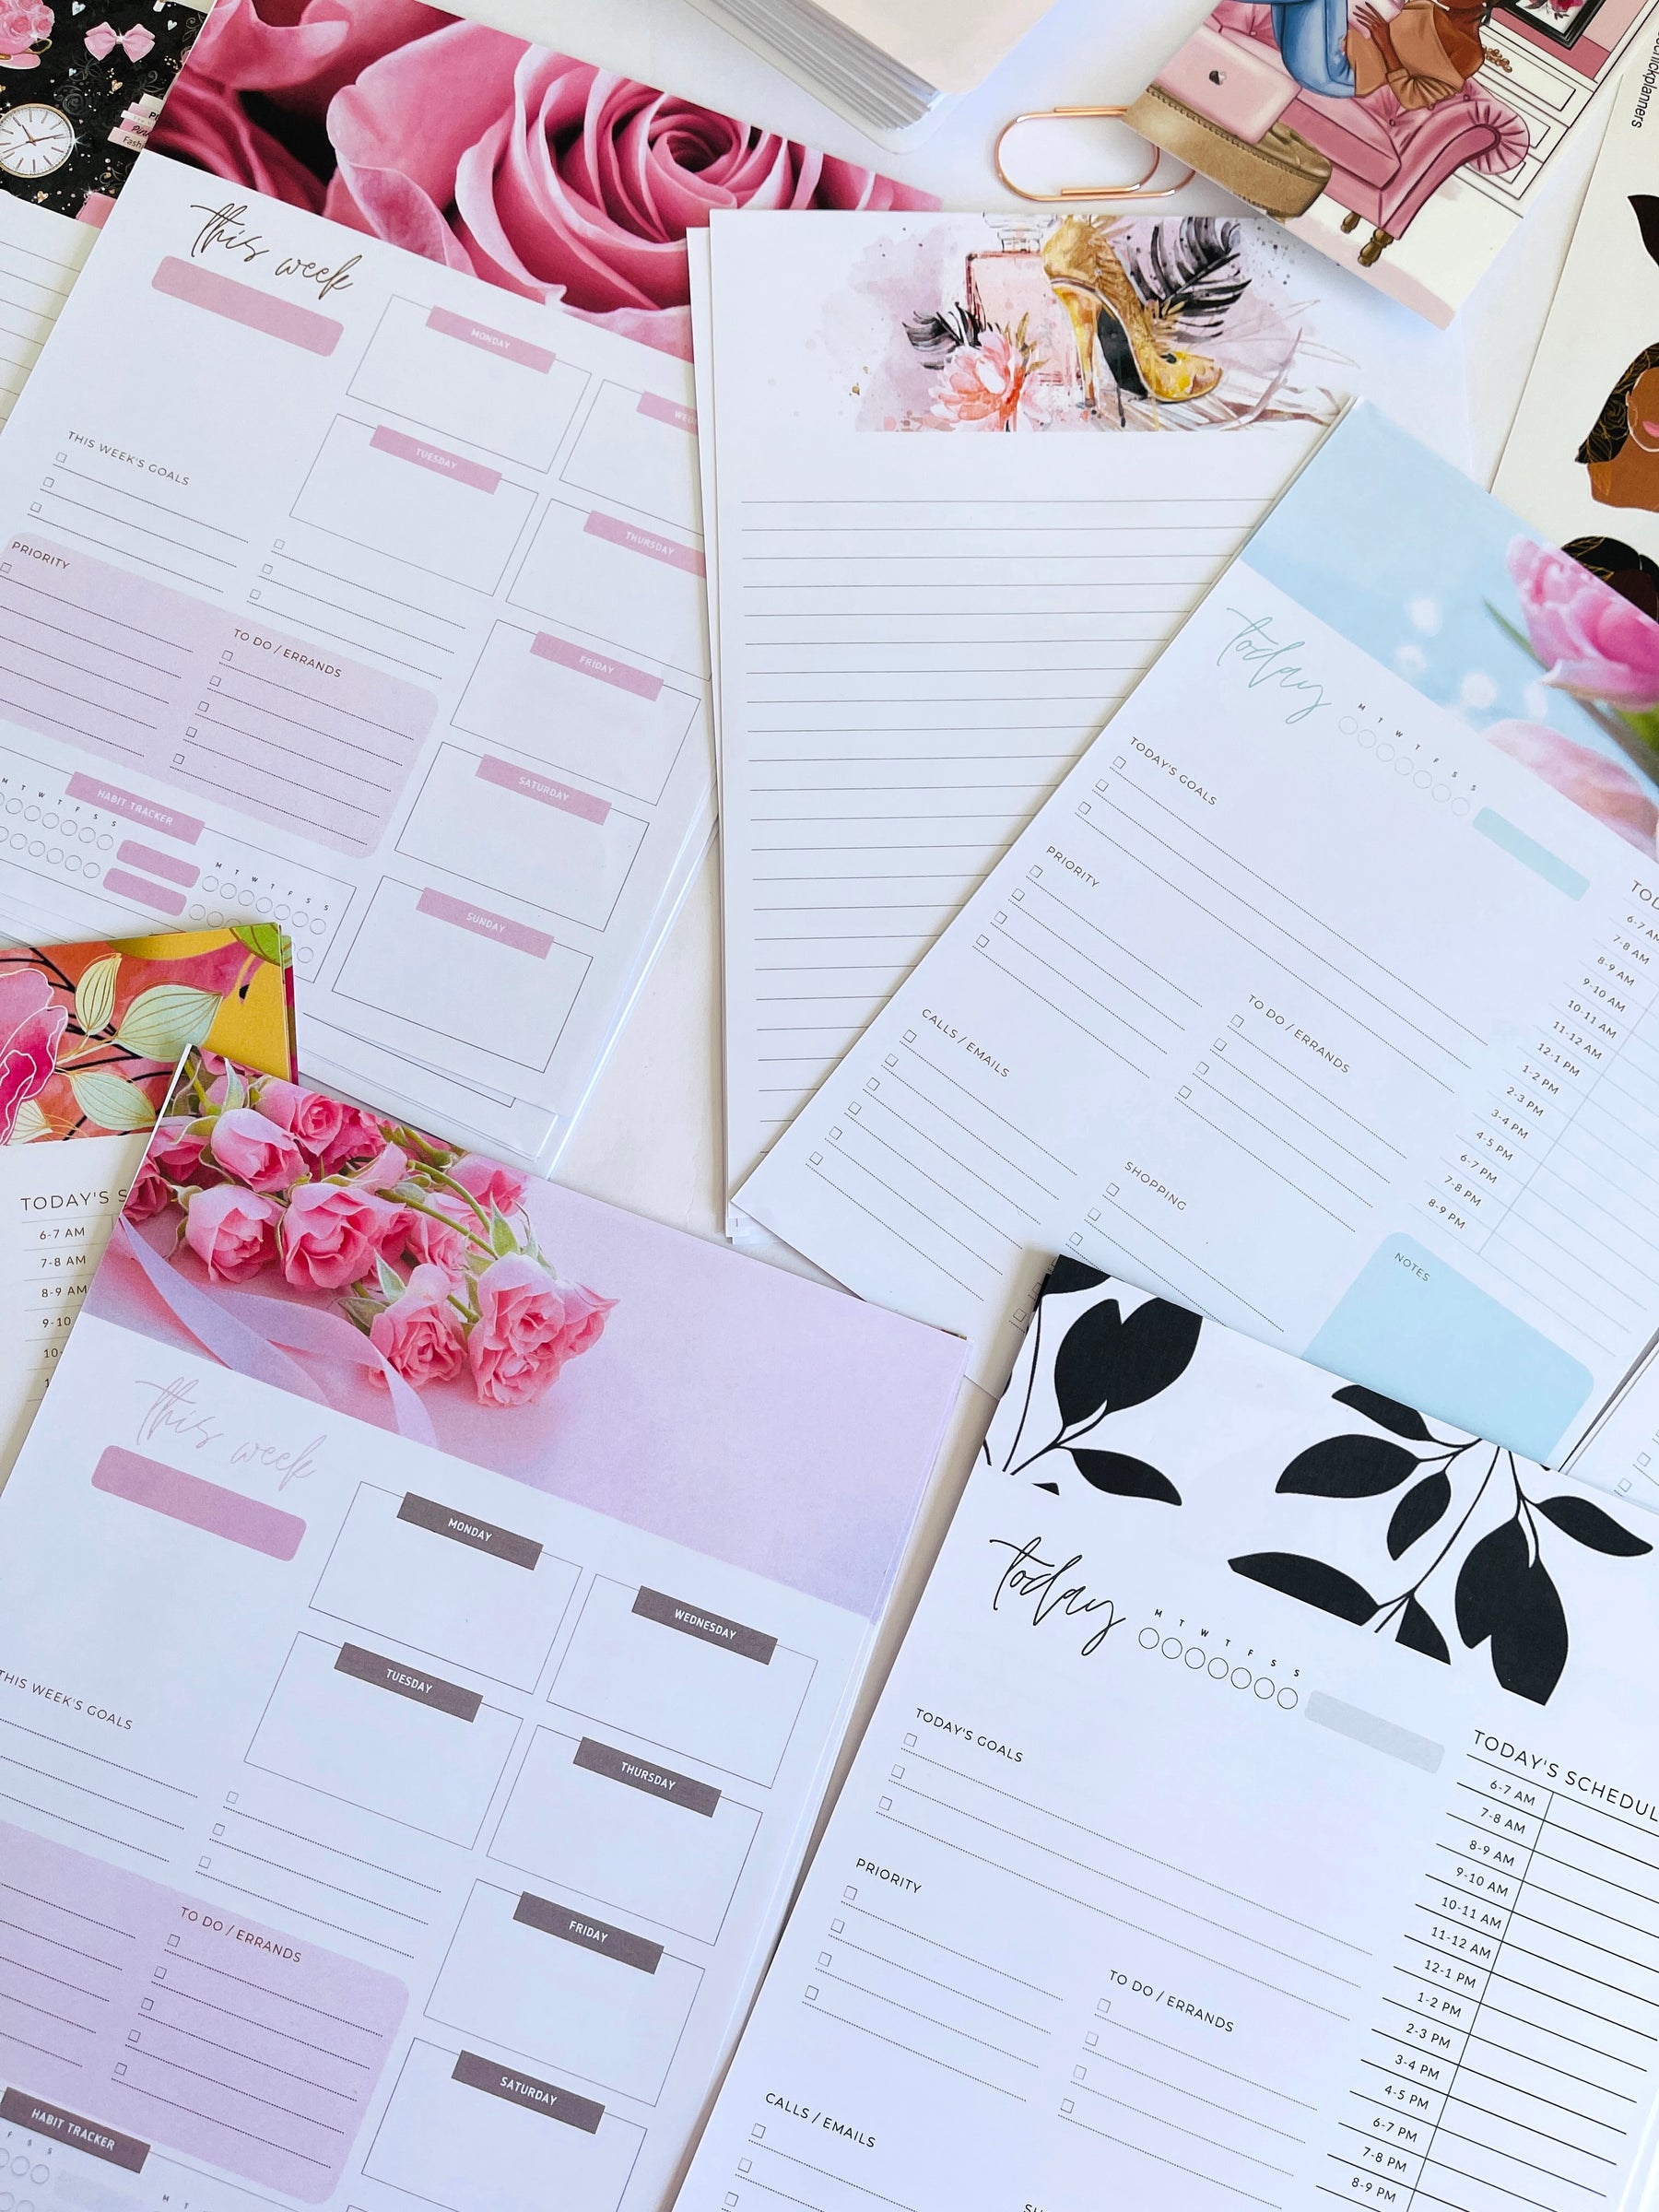 boss chick planners inserts for happy planner A5 planner Pocket Planner Big Planner Sheets for your planner